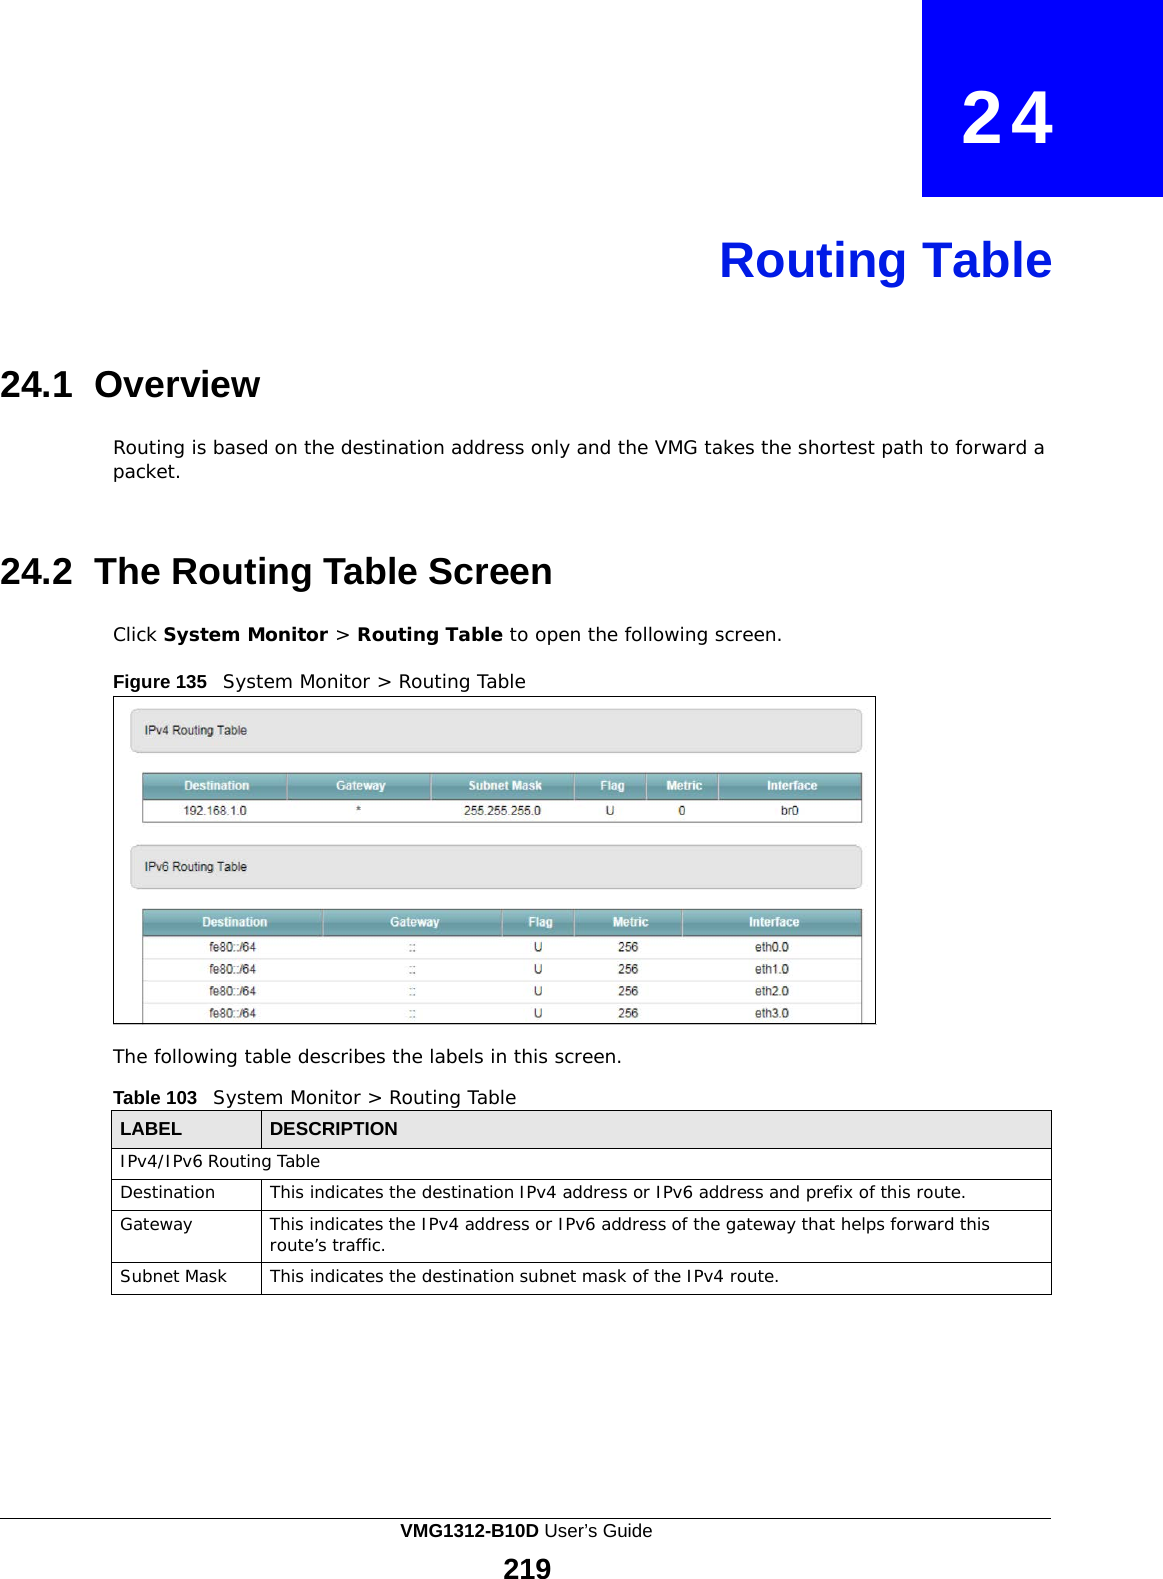    24     Routing Table     24.1 Overview  Routing is based on the destination address only and the VMG takes the shortest path to forward a packet.    24.2 The Routing Table Screen  Click System Monitor &gt; Routing Table to open the following screen.  Figure 135   System Monitor &gt; Routing Table                  The following table describes the labels in this screen.  Table 103   System Monitor &gt; Routing Table  LABEL DESCRIPTION IPv4/IPv6 Routing Table Destination This indicates the destination IPv4 address or IPv6 address and prefix of this route. Gateway This indicates the IPv4 address or IPv6 address of the gateway that helps forward this route’s traffic. Subnet Mask This indicates the destination subnet mask of the IPv4 route. VMG1312-B10D User’s Guide 219  